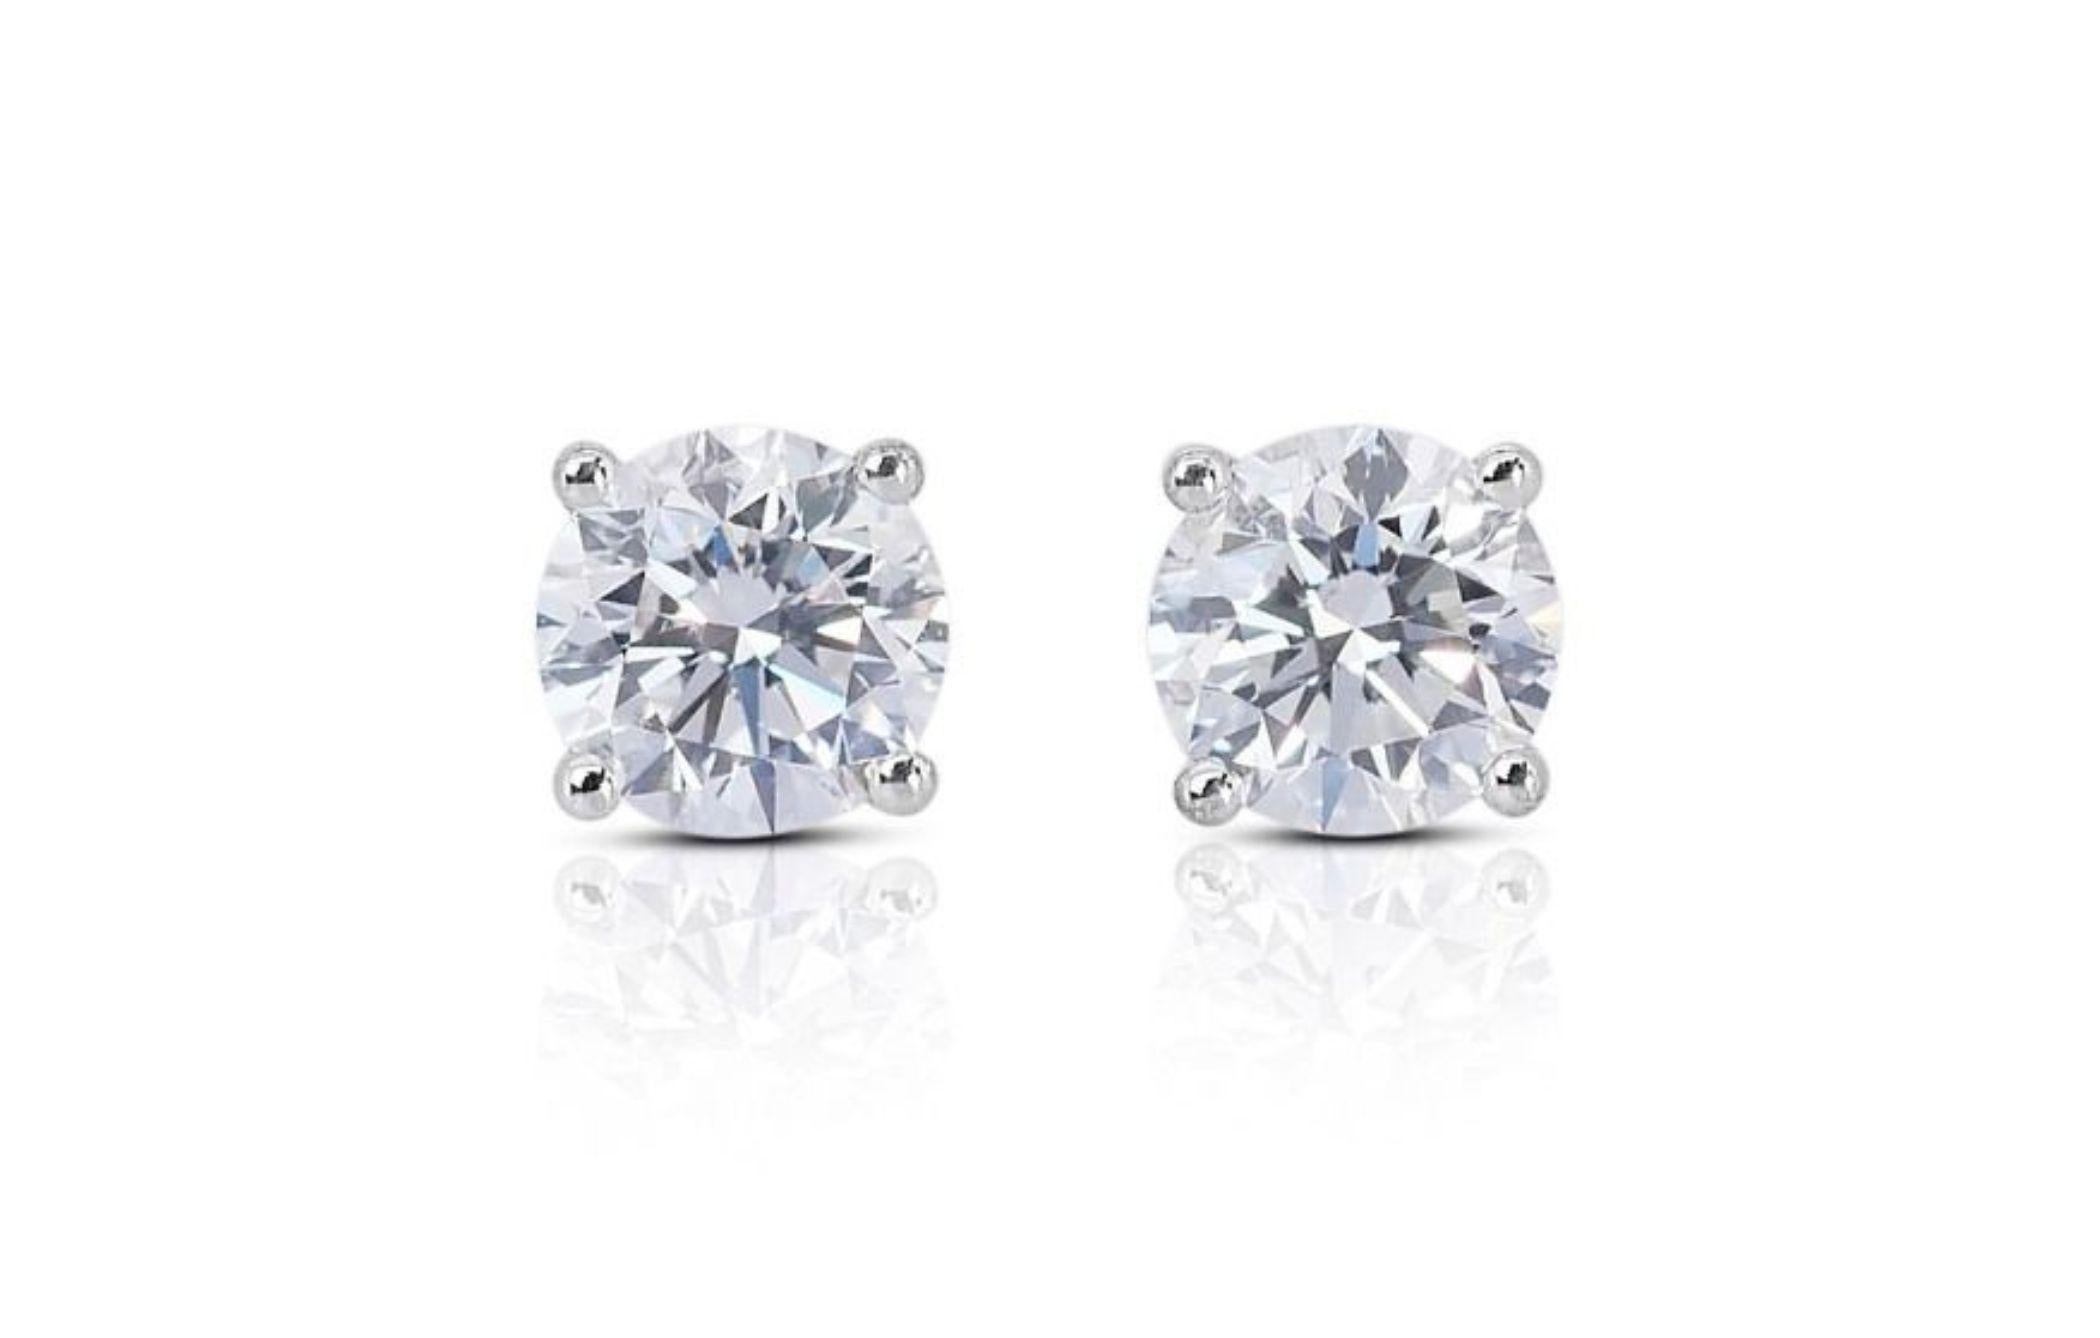 The exquisite earrings are crafted from gleaming 18K White Gold and exude elegance and refinement. The diamonds boast an exceptional D-E color and VVS1 clarity, ensuring a captivating sparkle that radiates timeless glamour. The EX cut grade further